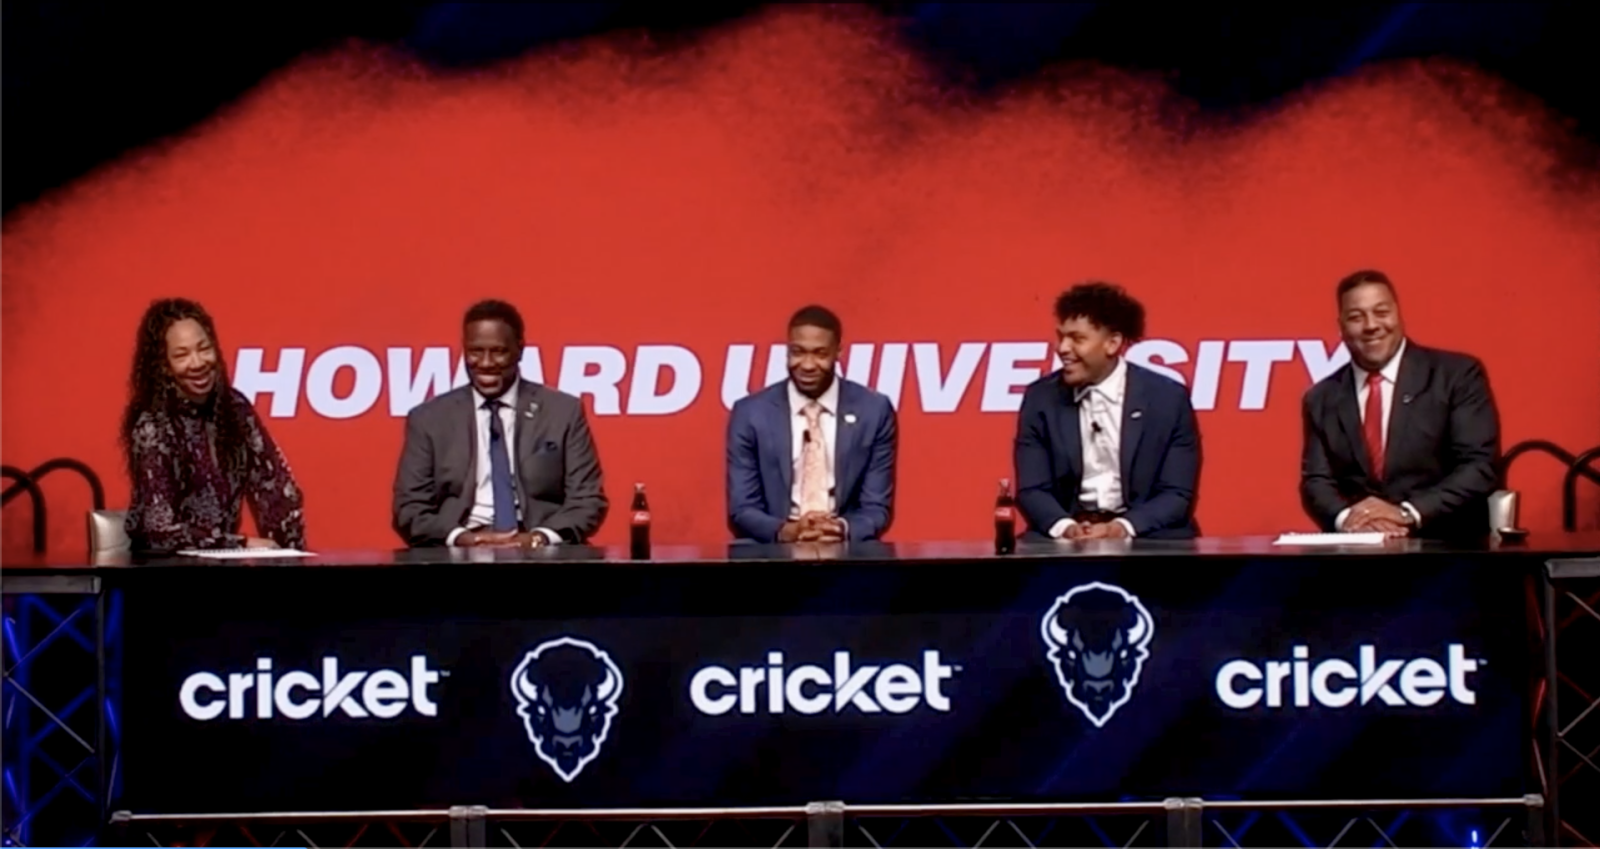 Walker in a sports panel of five people with red background that says Howard University